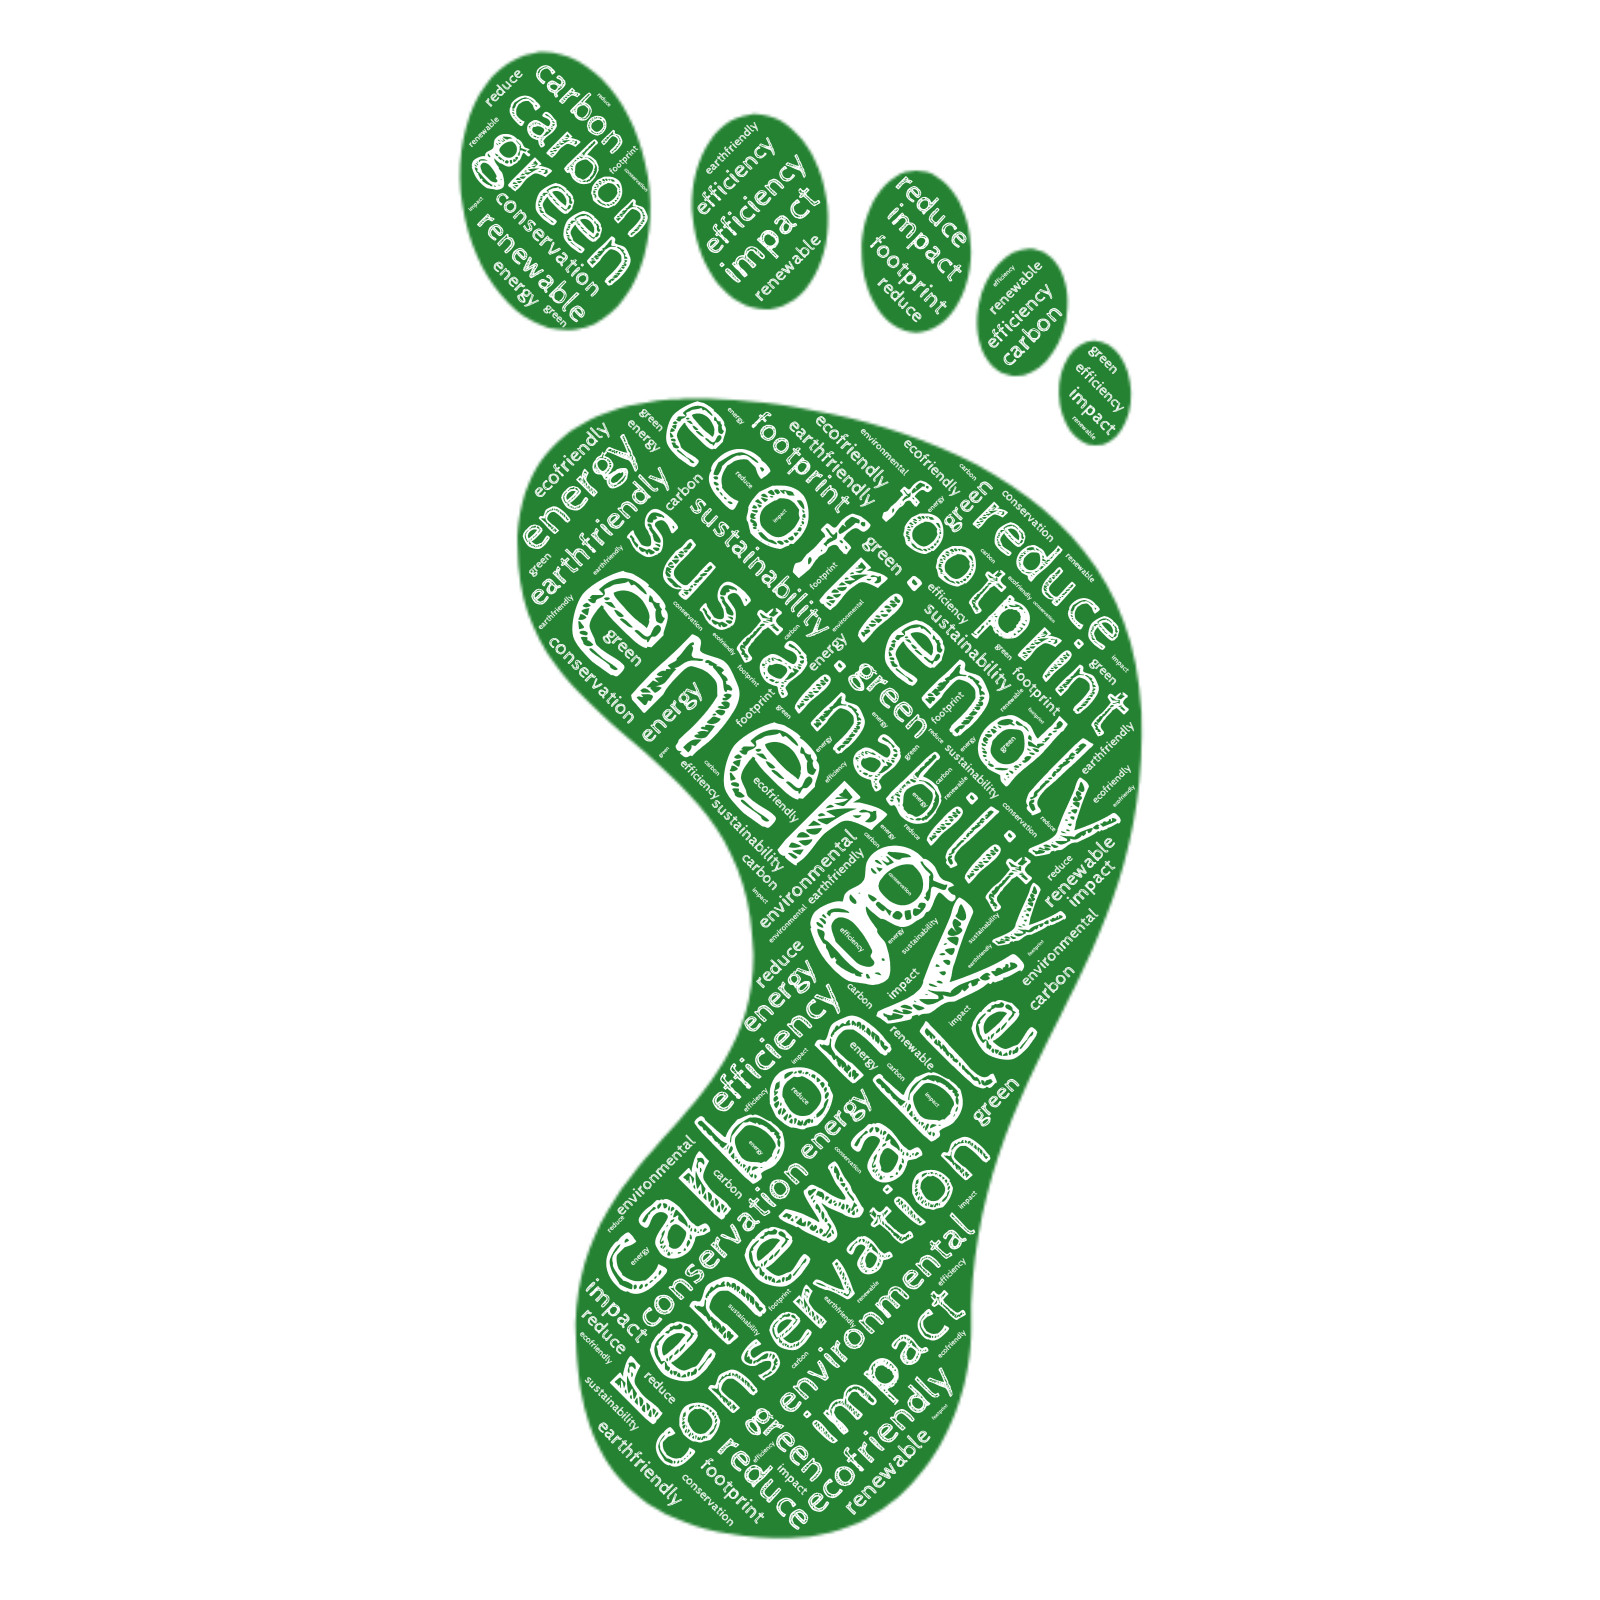 This Presentation Clipart shows a preview of Green Footprint Word Cloud Art